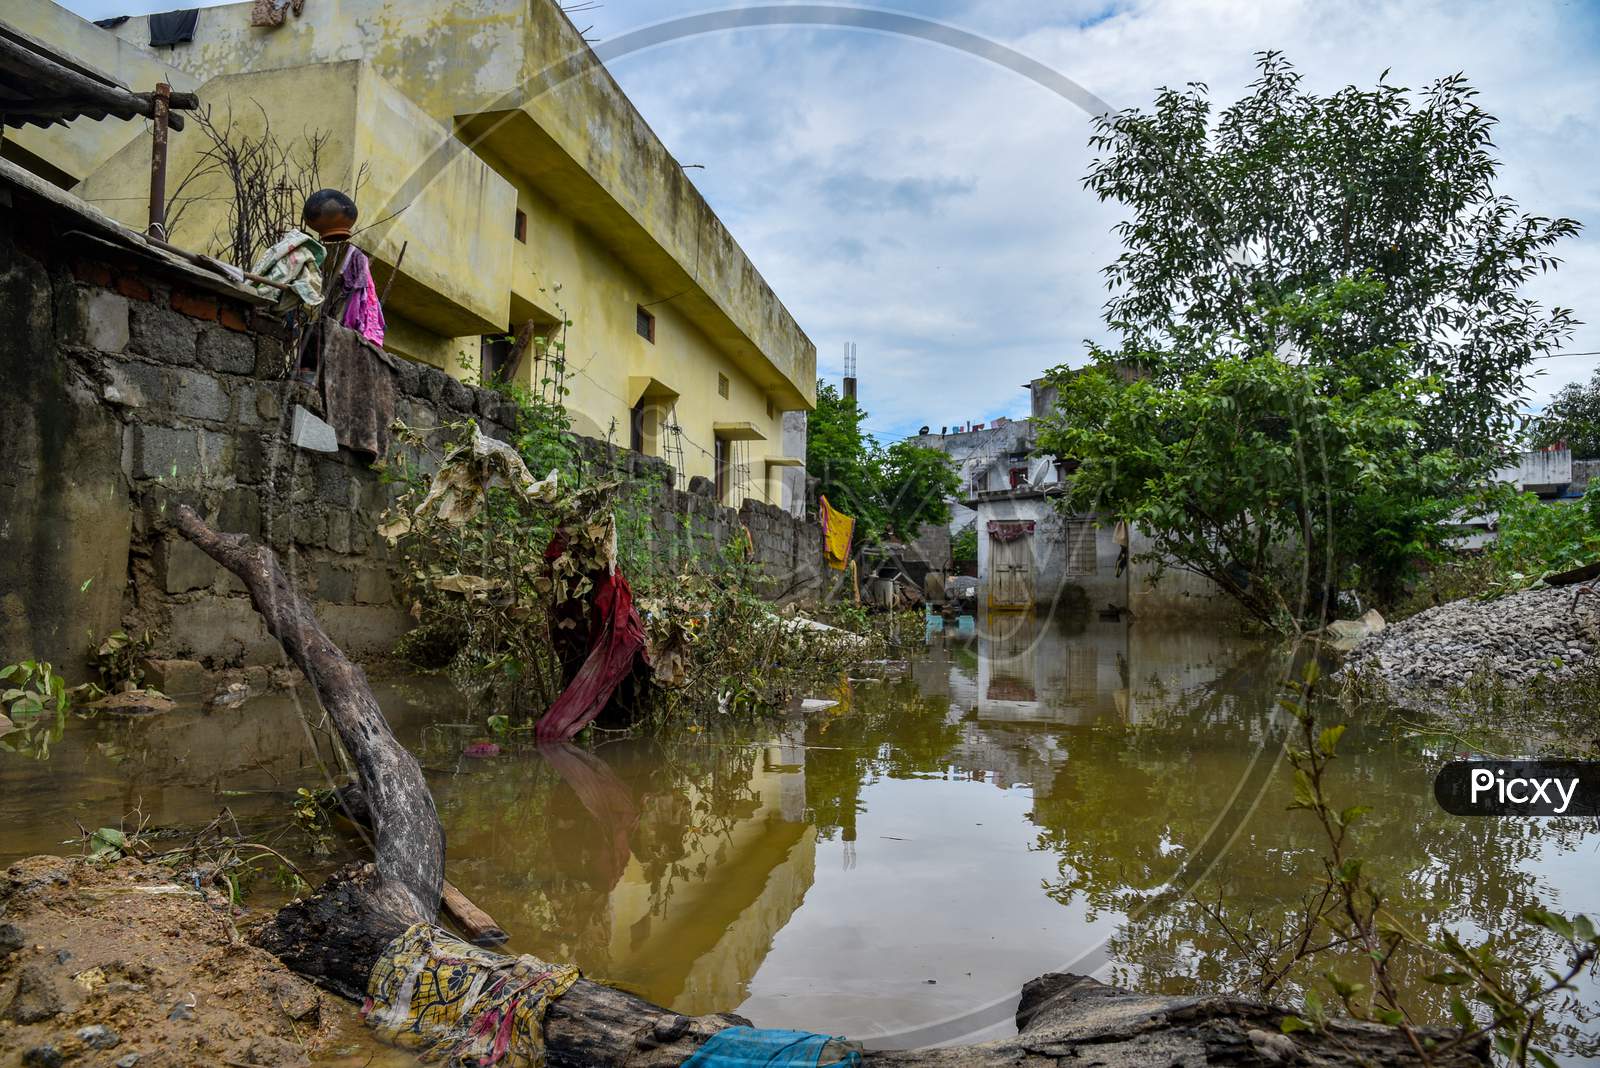 A house that is still inundated under water even after 4 days of flood in Warangal, hanamkonda, August 18, 2020.